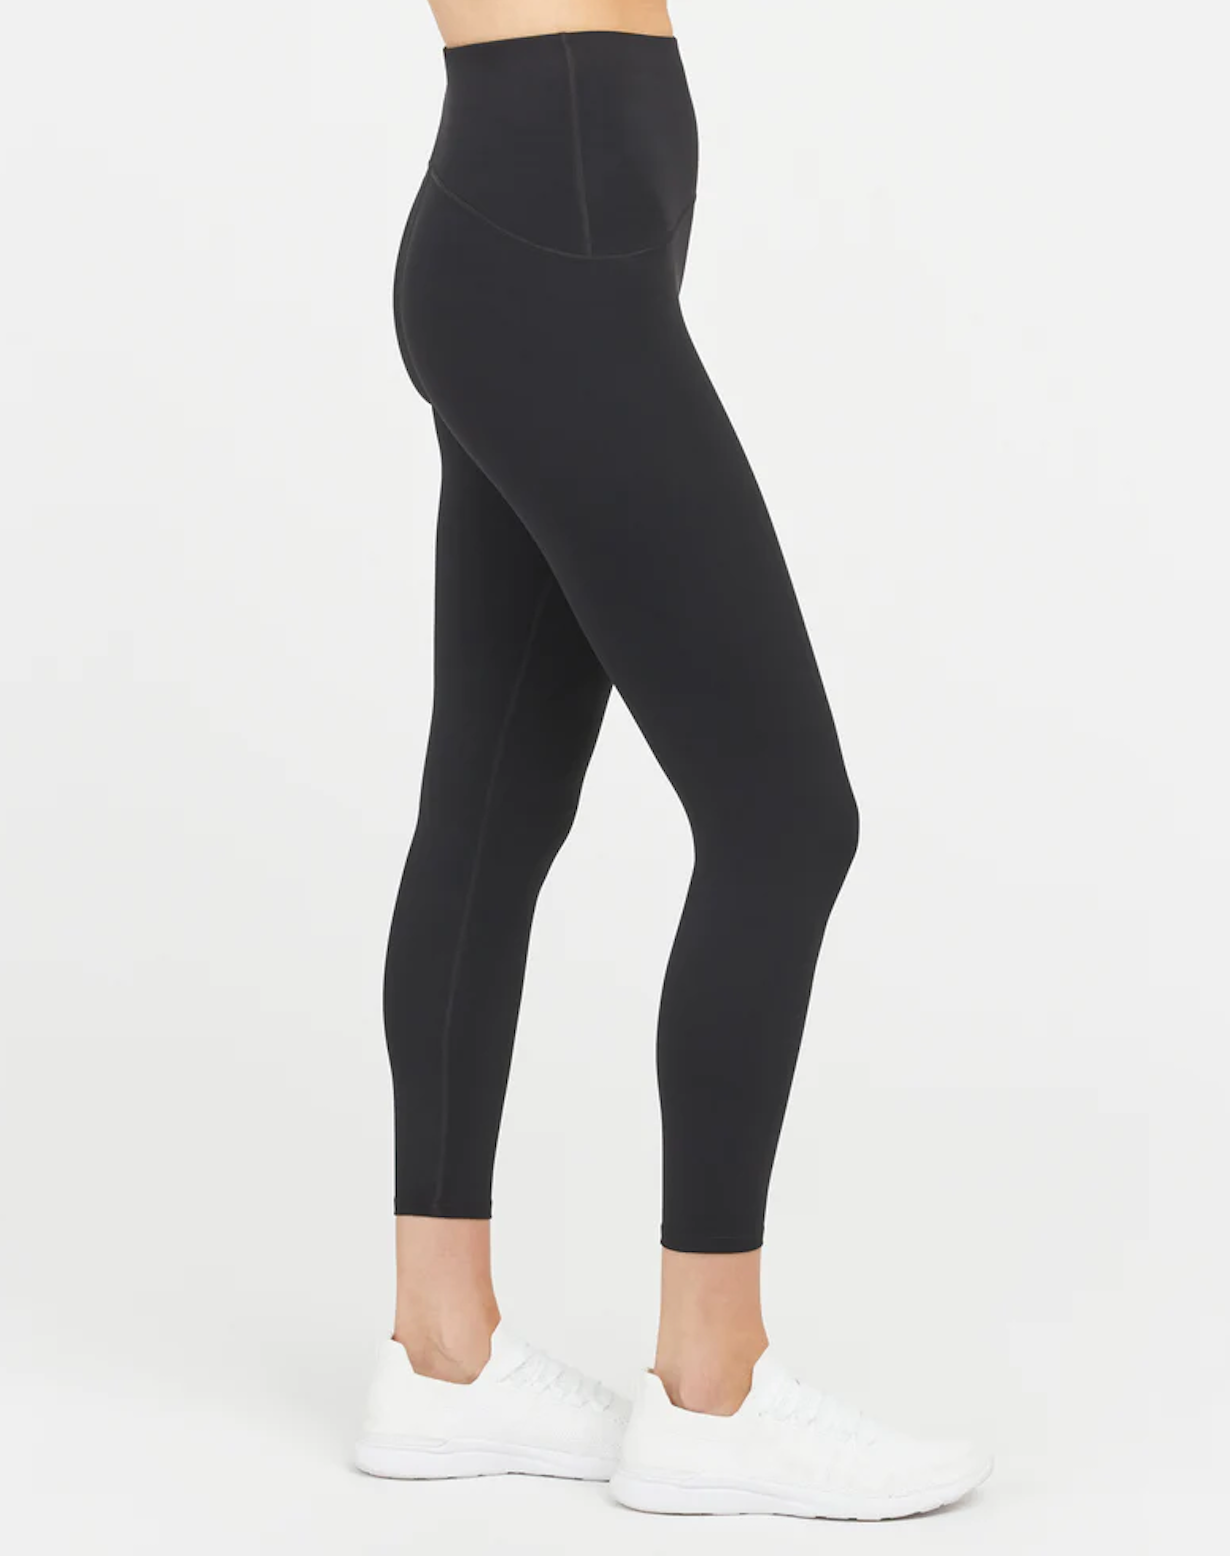 Spanx Booty Boost Active Leggings